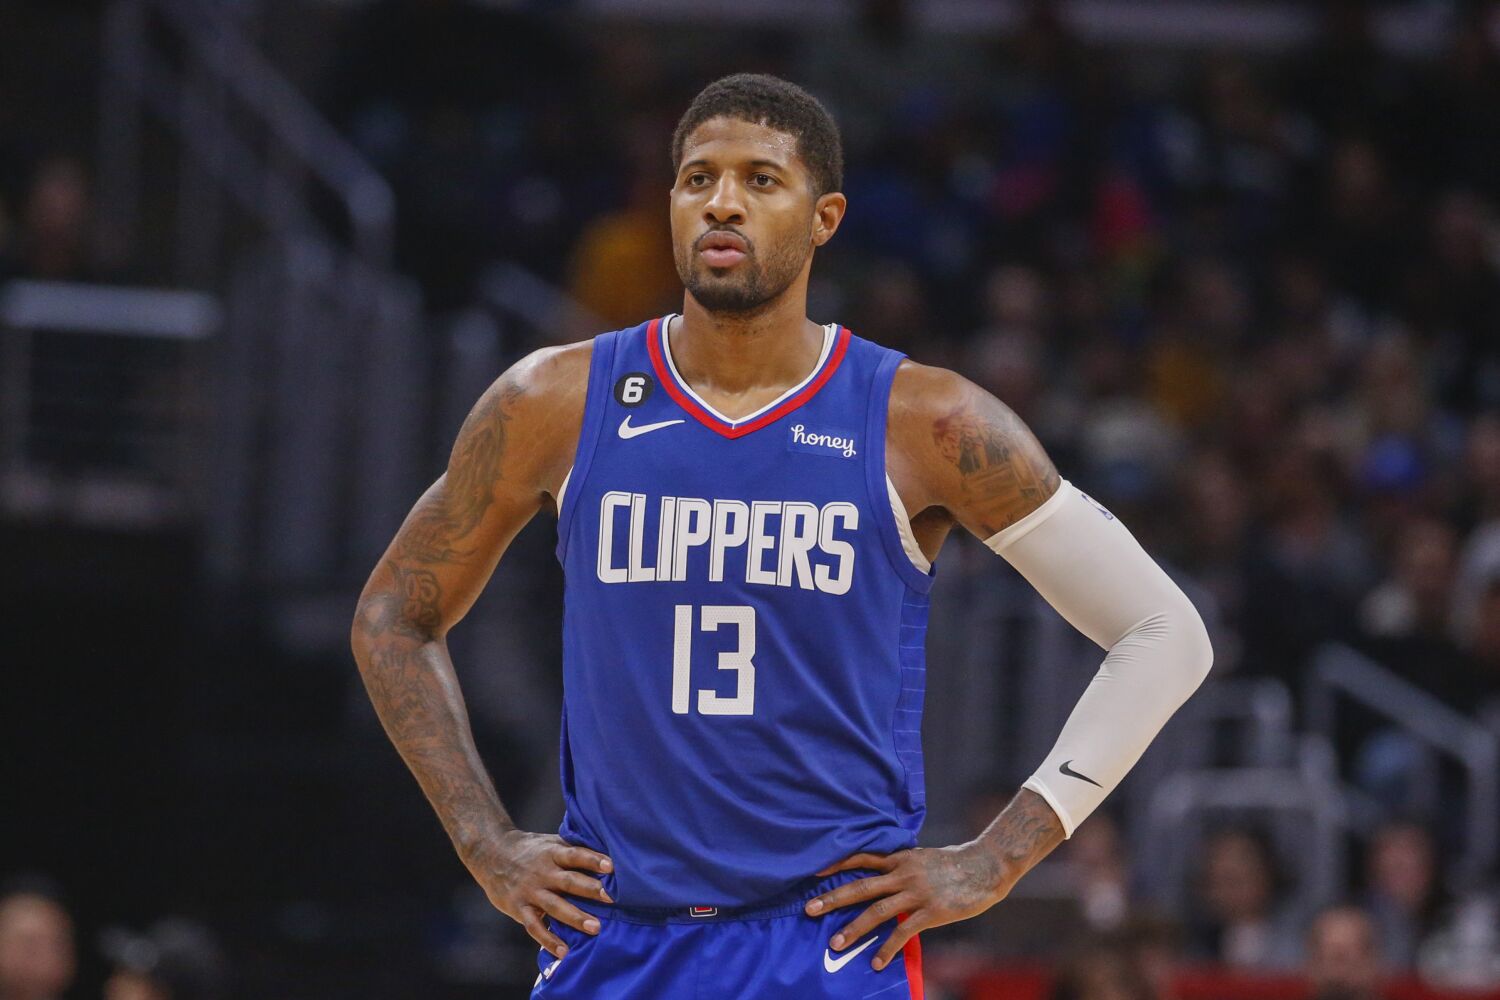 Clippers forward Paul George subject of trade talks